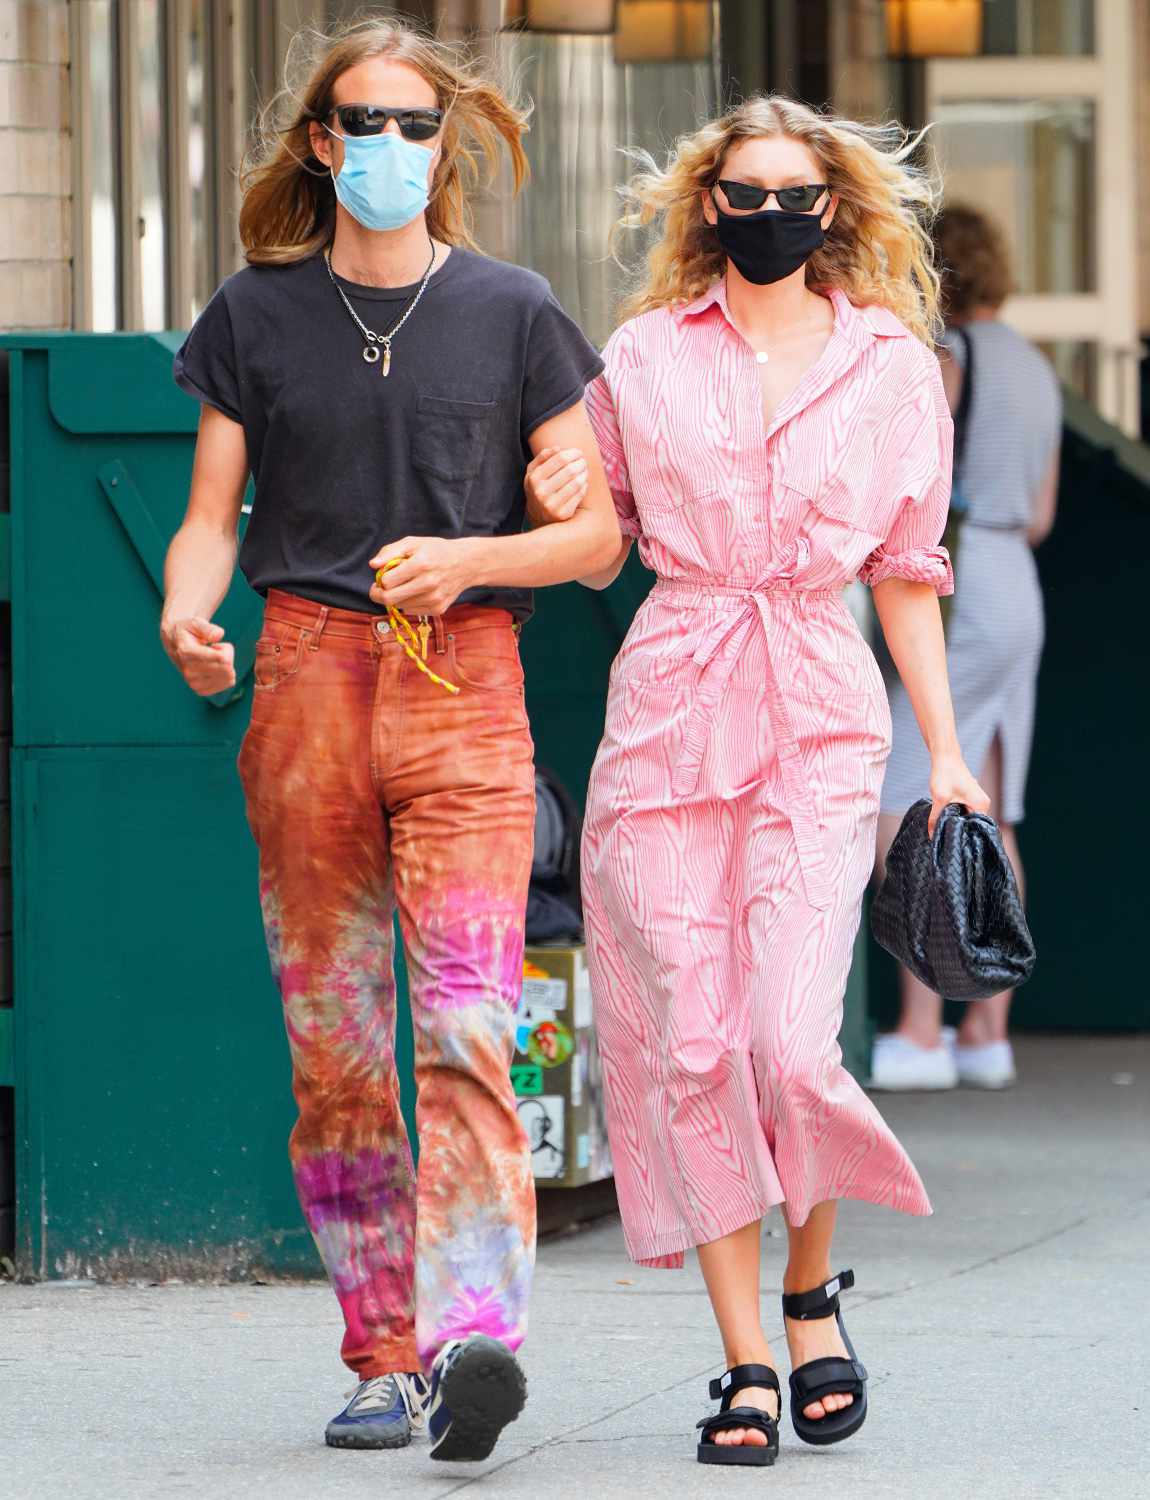 Elsa Hosk Is Pretty In Pink When Out And About With Husband Tom Daly In Sunny New York